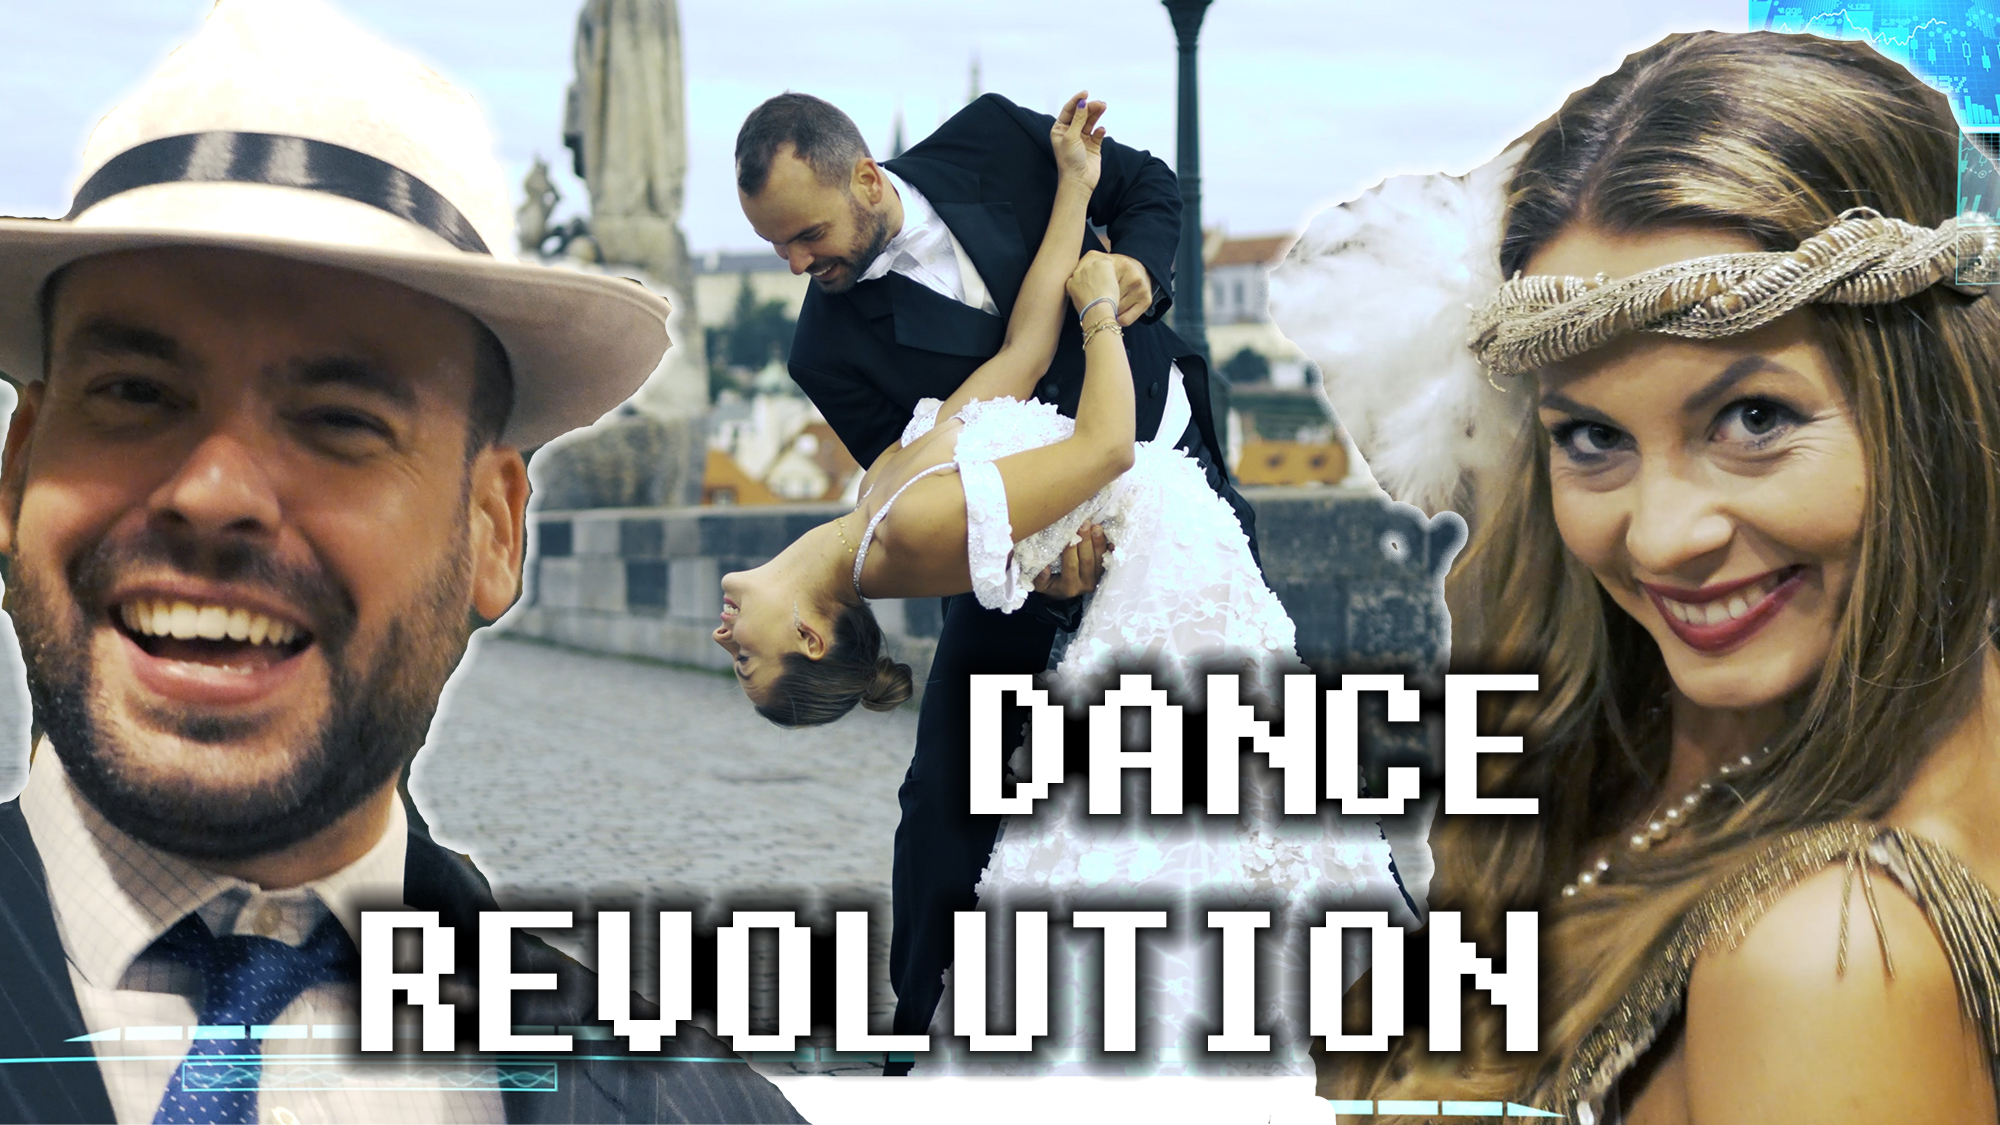 Stardance finalist dance video is out! Dance revolution bets on the history of dance